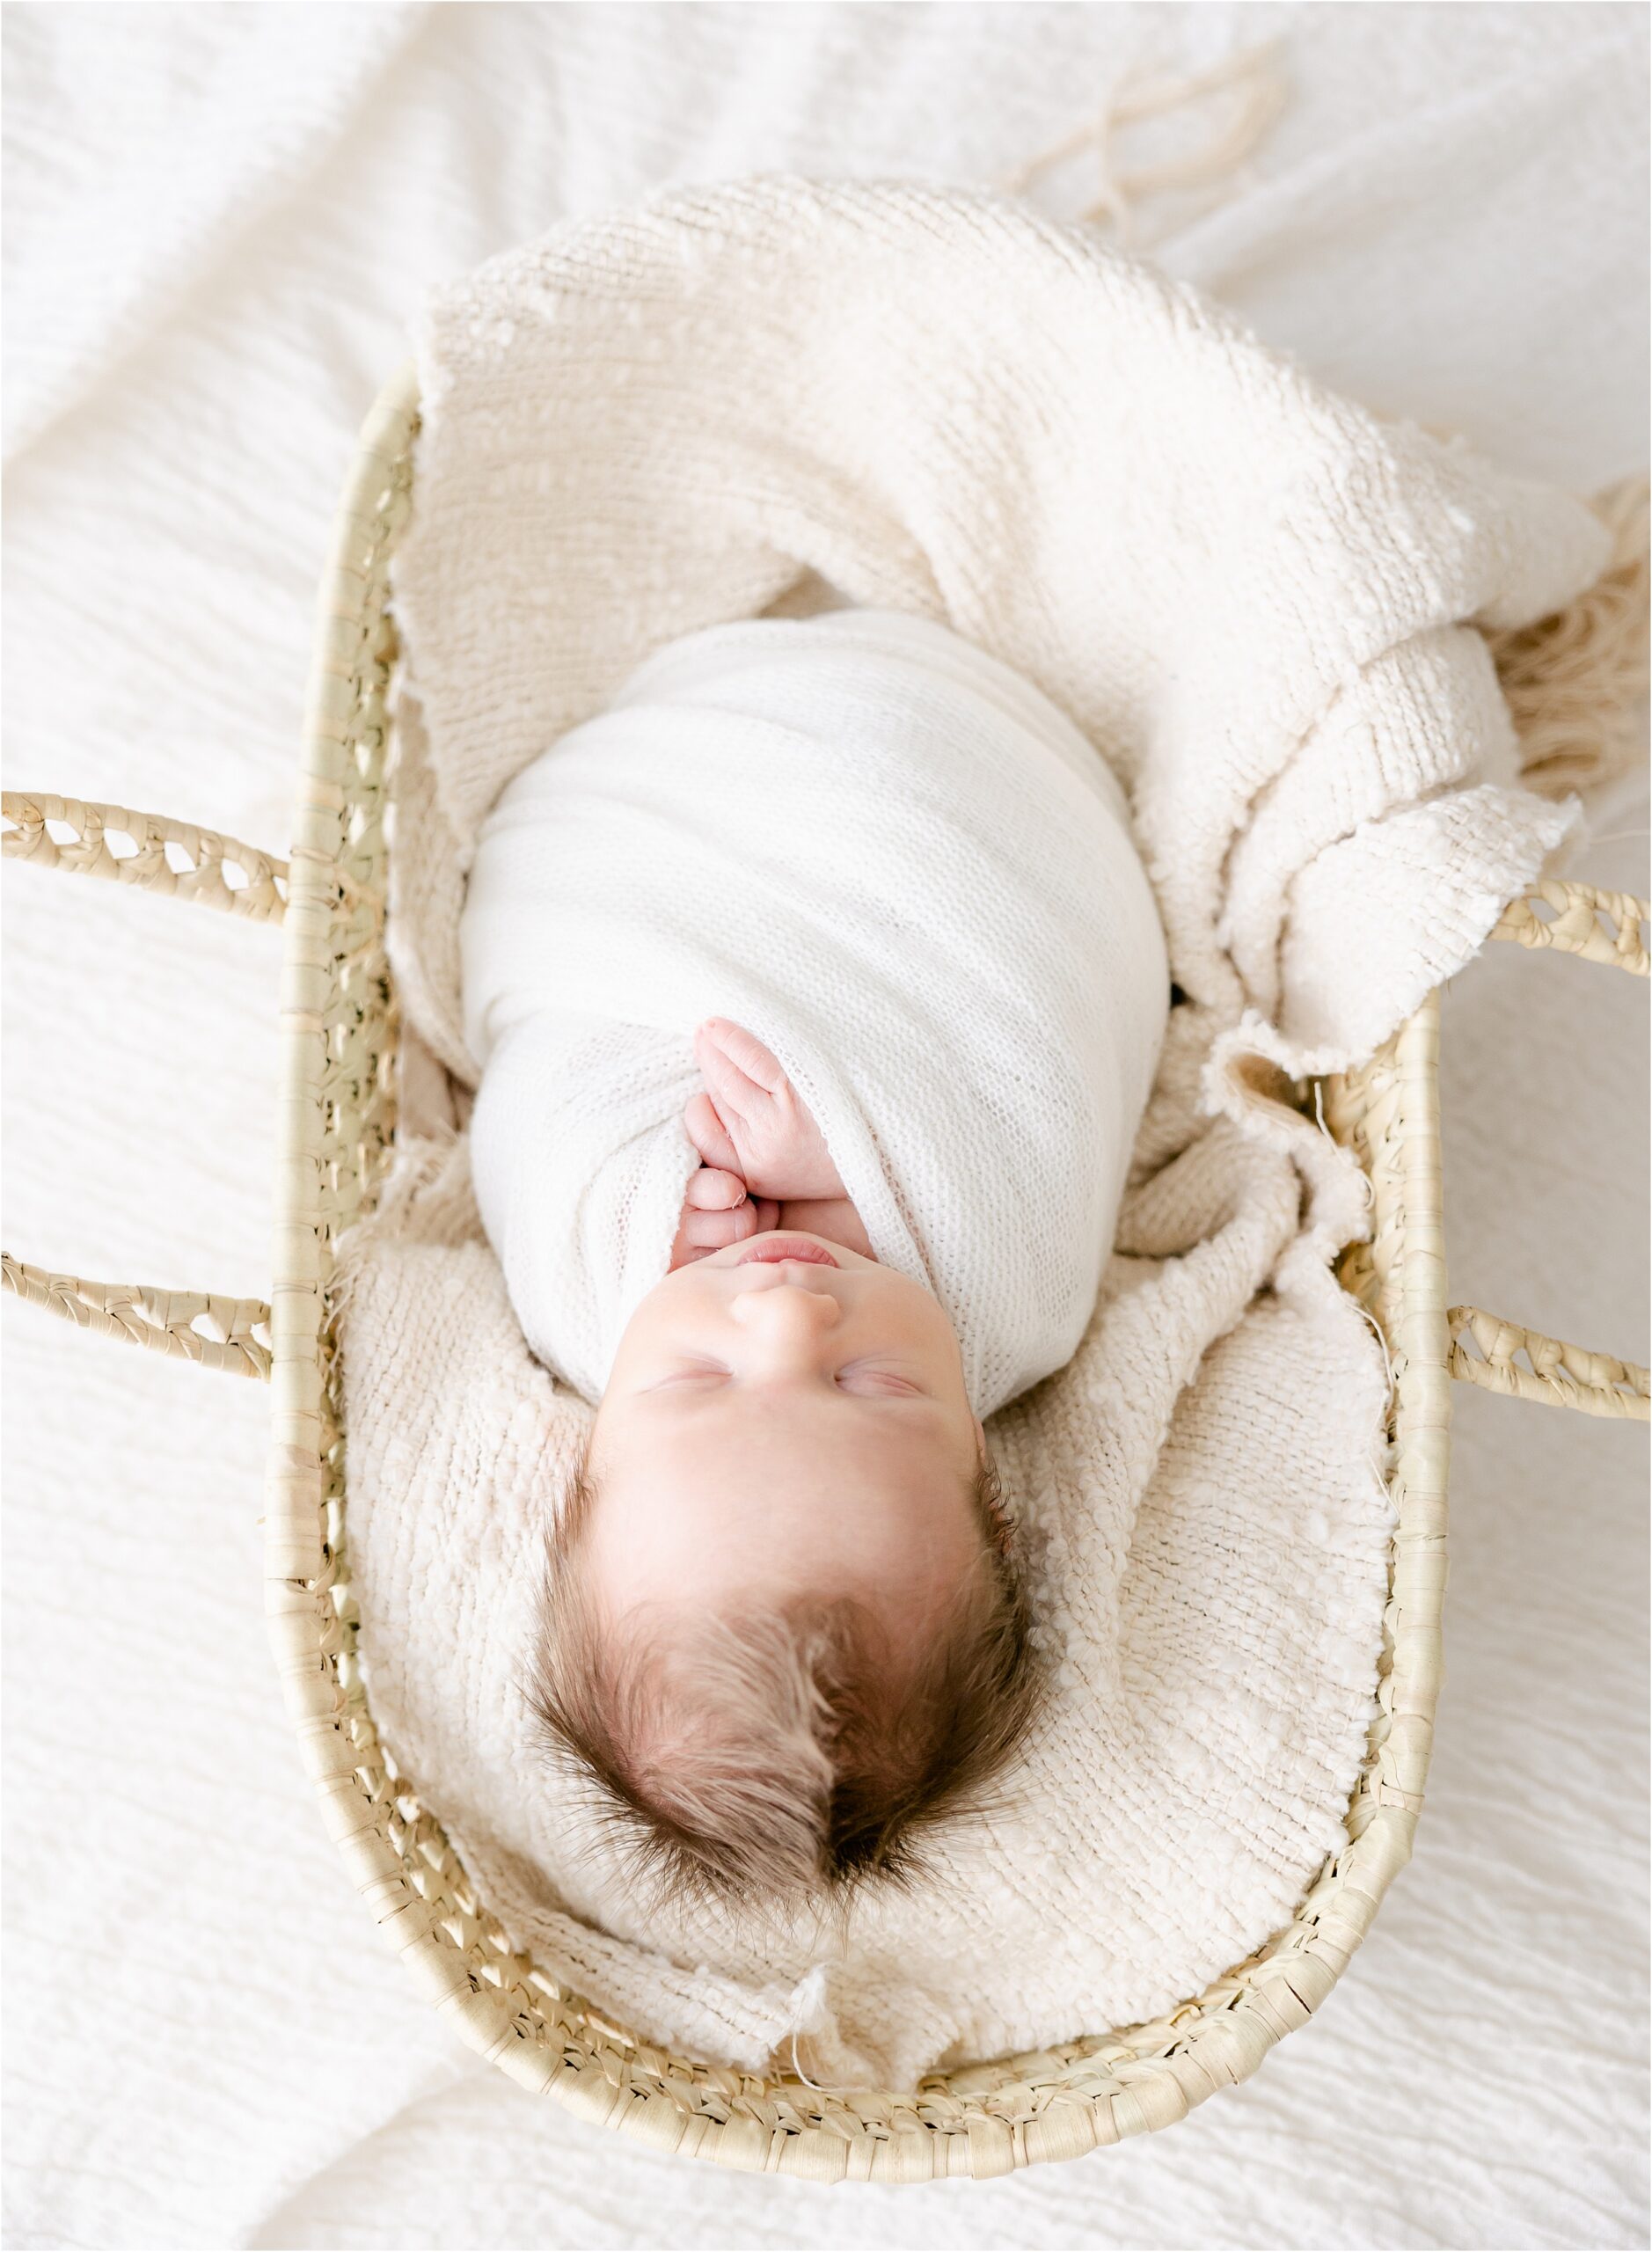 newborn baby swaddled in white blanket lying in a moses basket, how much to invest on newborn & family photography